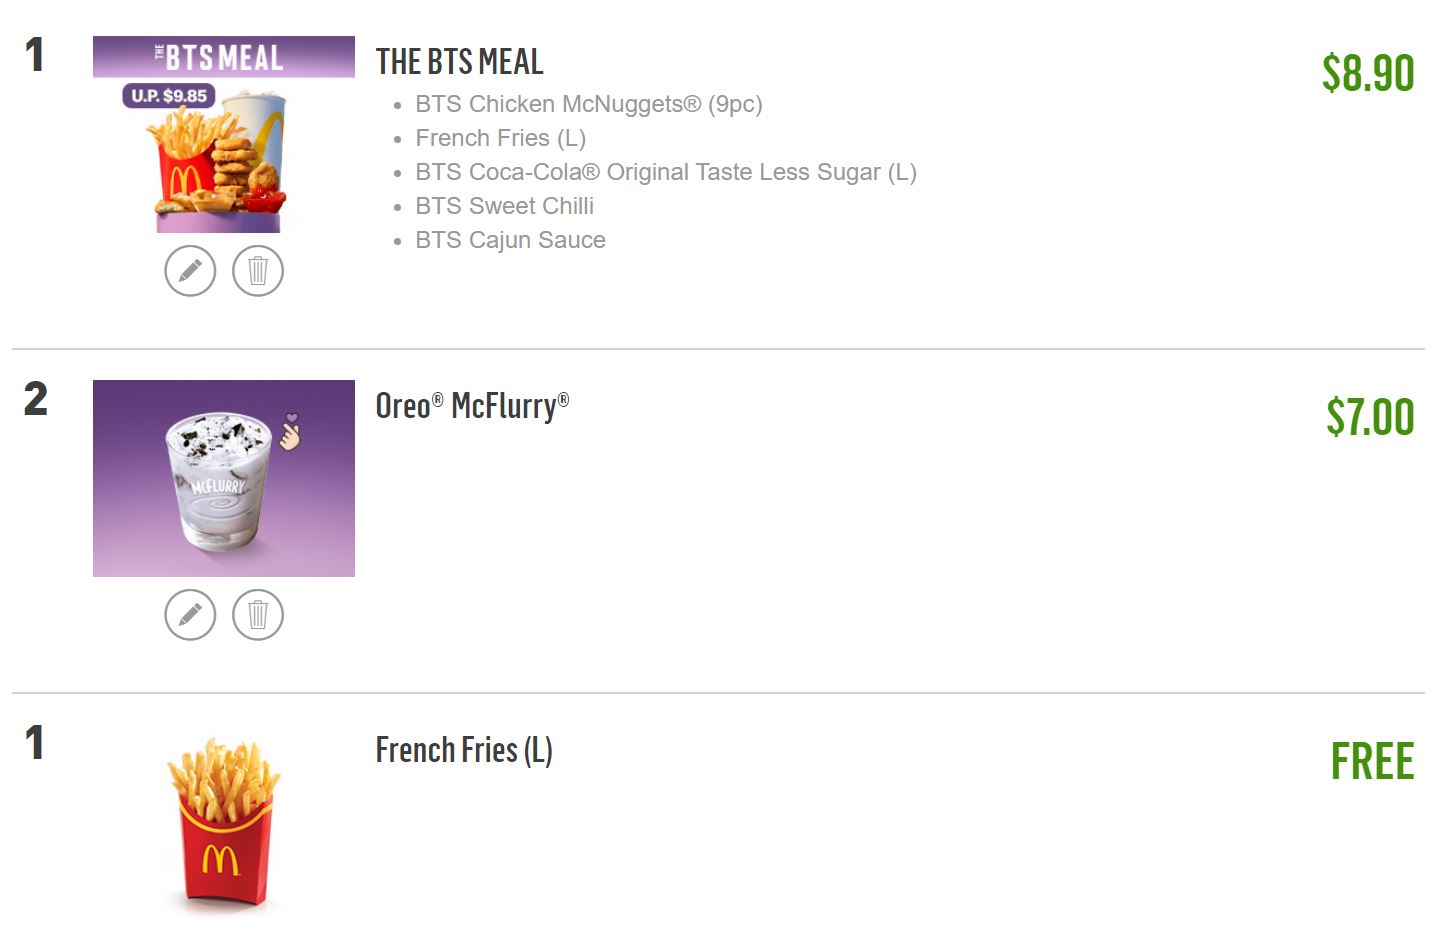 Ordering the BTS Meal on McDelivery? Use these coupon codes to get free treat for the month of June! - 1